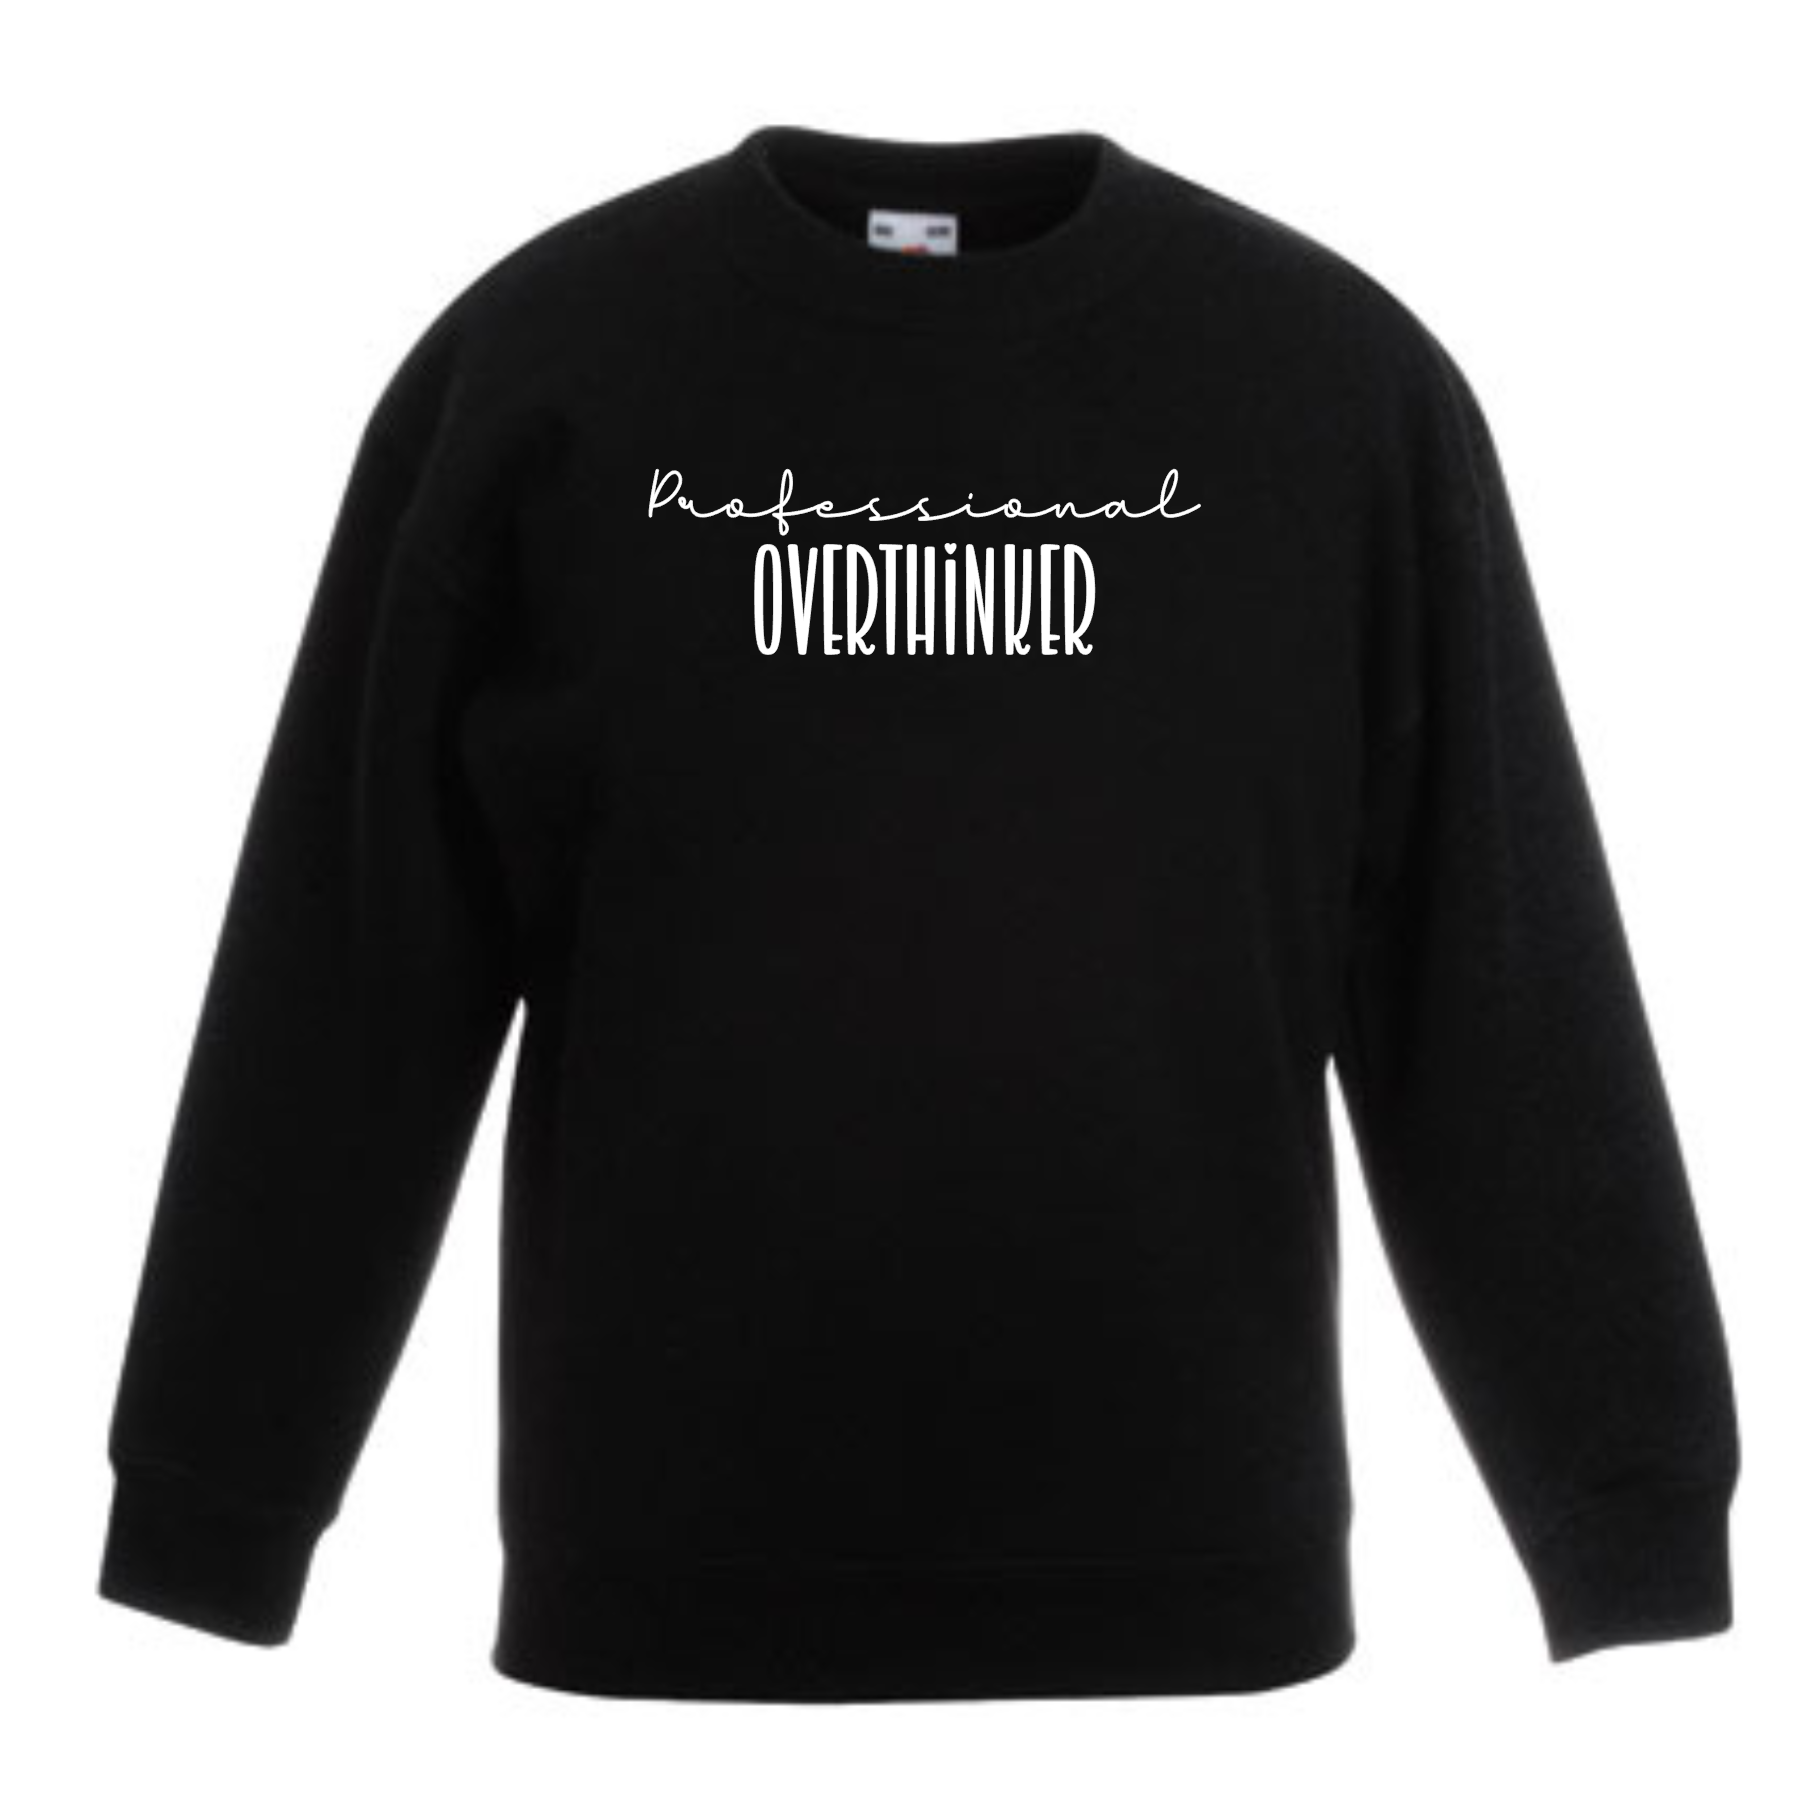 Sweater – Proffesional overthinker